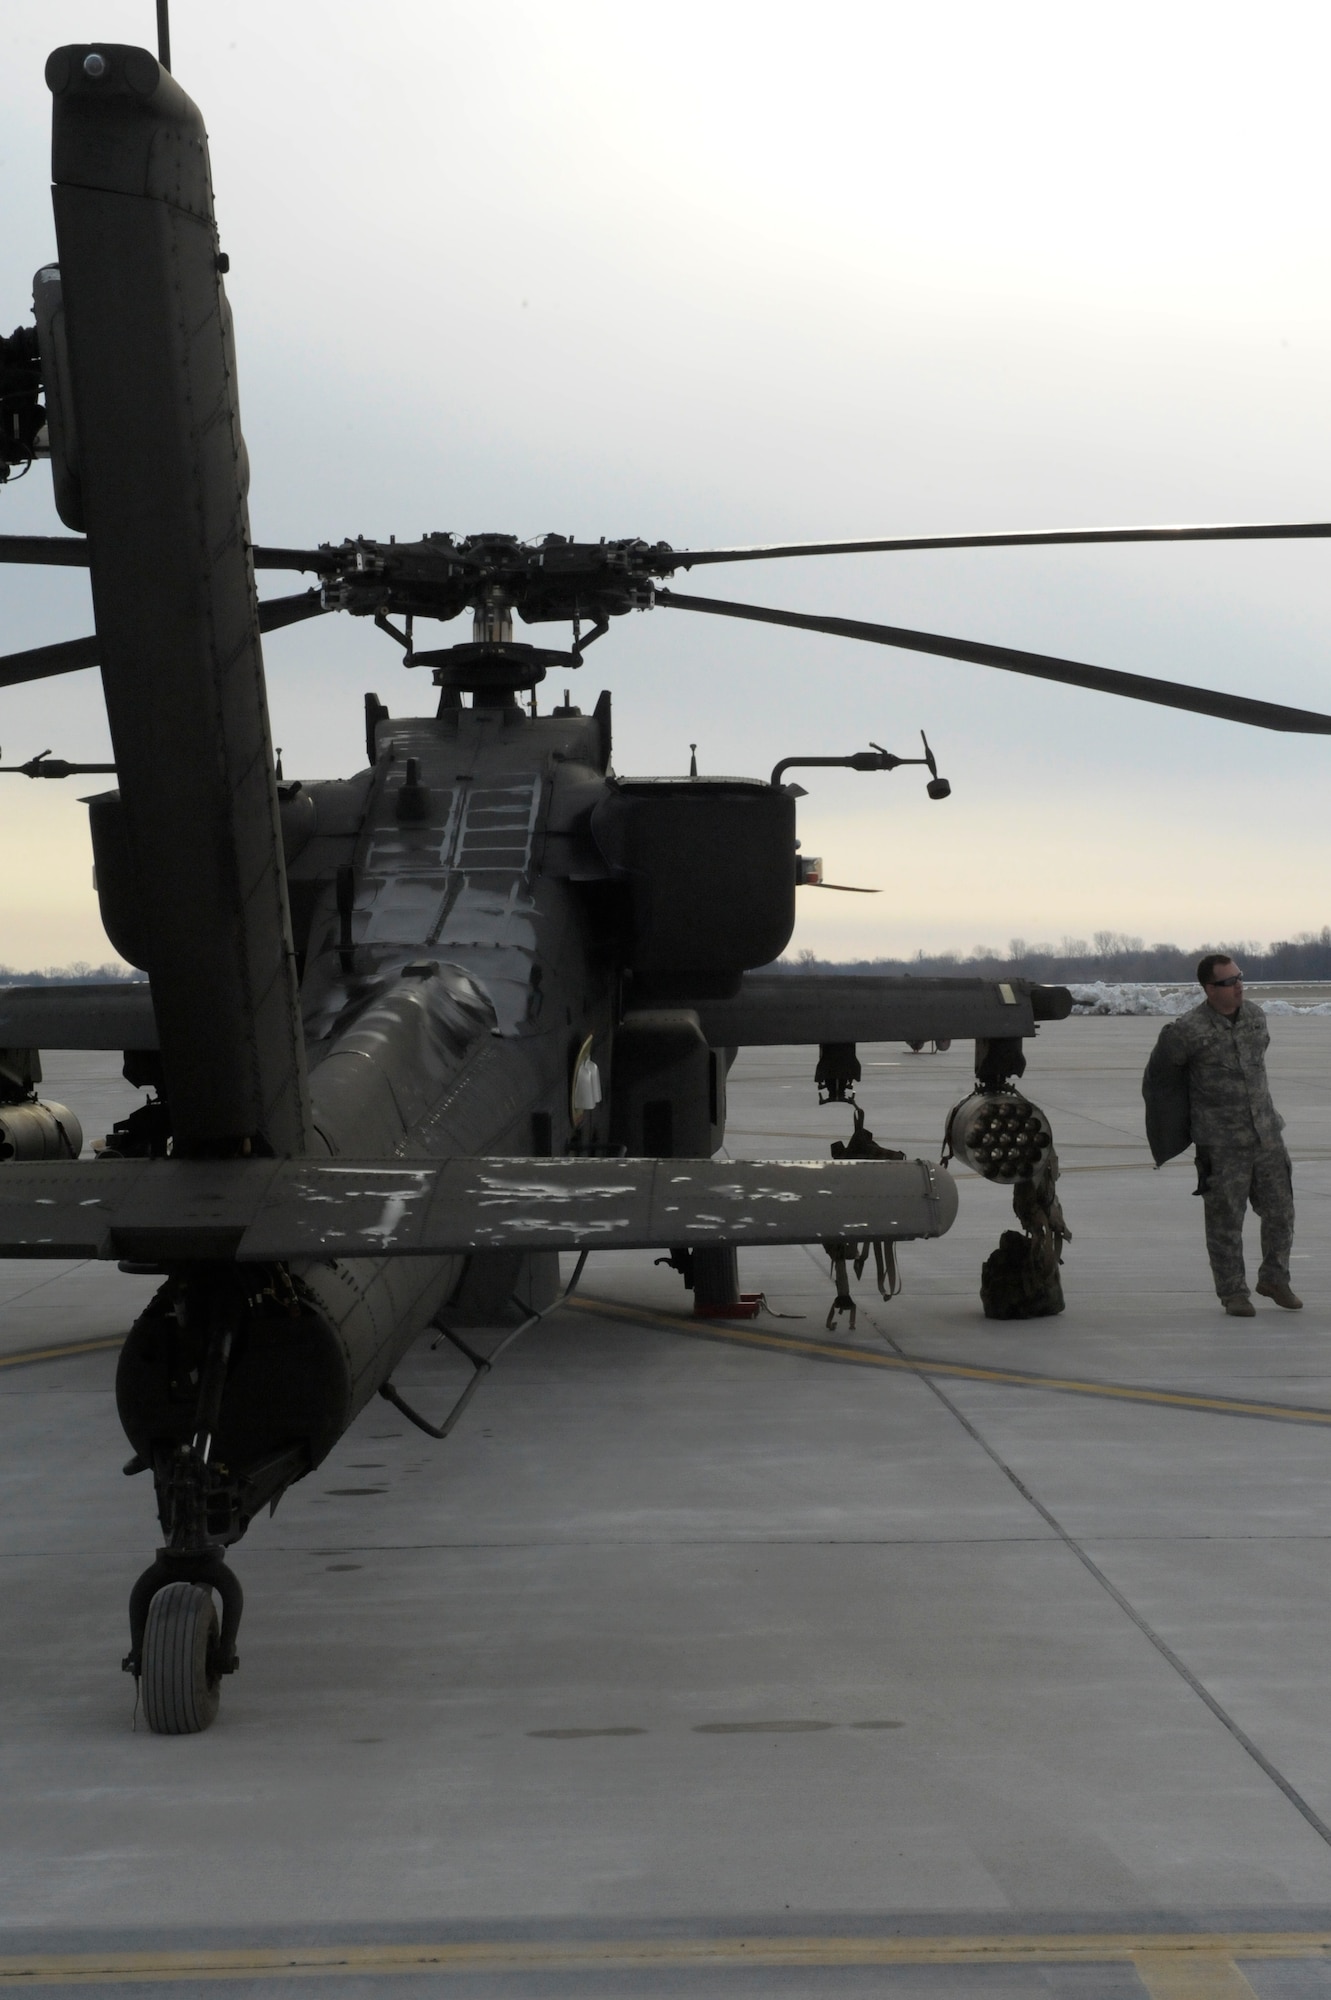 A U.S. Army AH-64 Apache Longbow crew chief from the 1-135th Attack Reconnaissance Battalion at Whiteman Air Force Base, Mo., prepares his aircraft March 27, 2013, for its deployment to Afghanistan. The 1-135th ARB will be working primarily with combat operations. (U.S. Air Force photo by Airman 1st Class Shelby R. Orozco/Released)